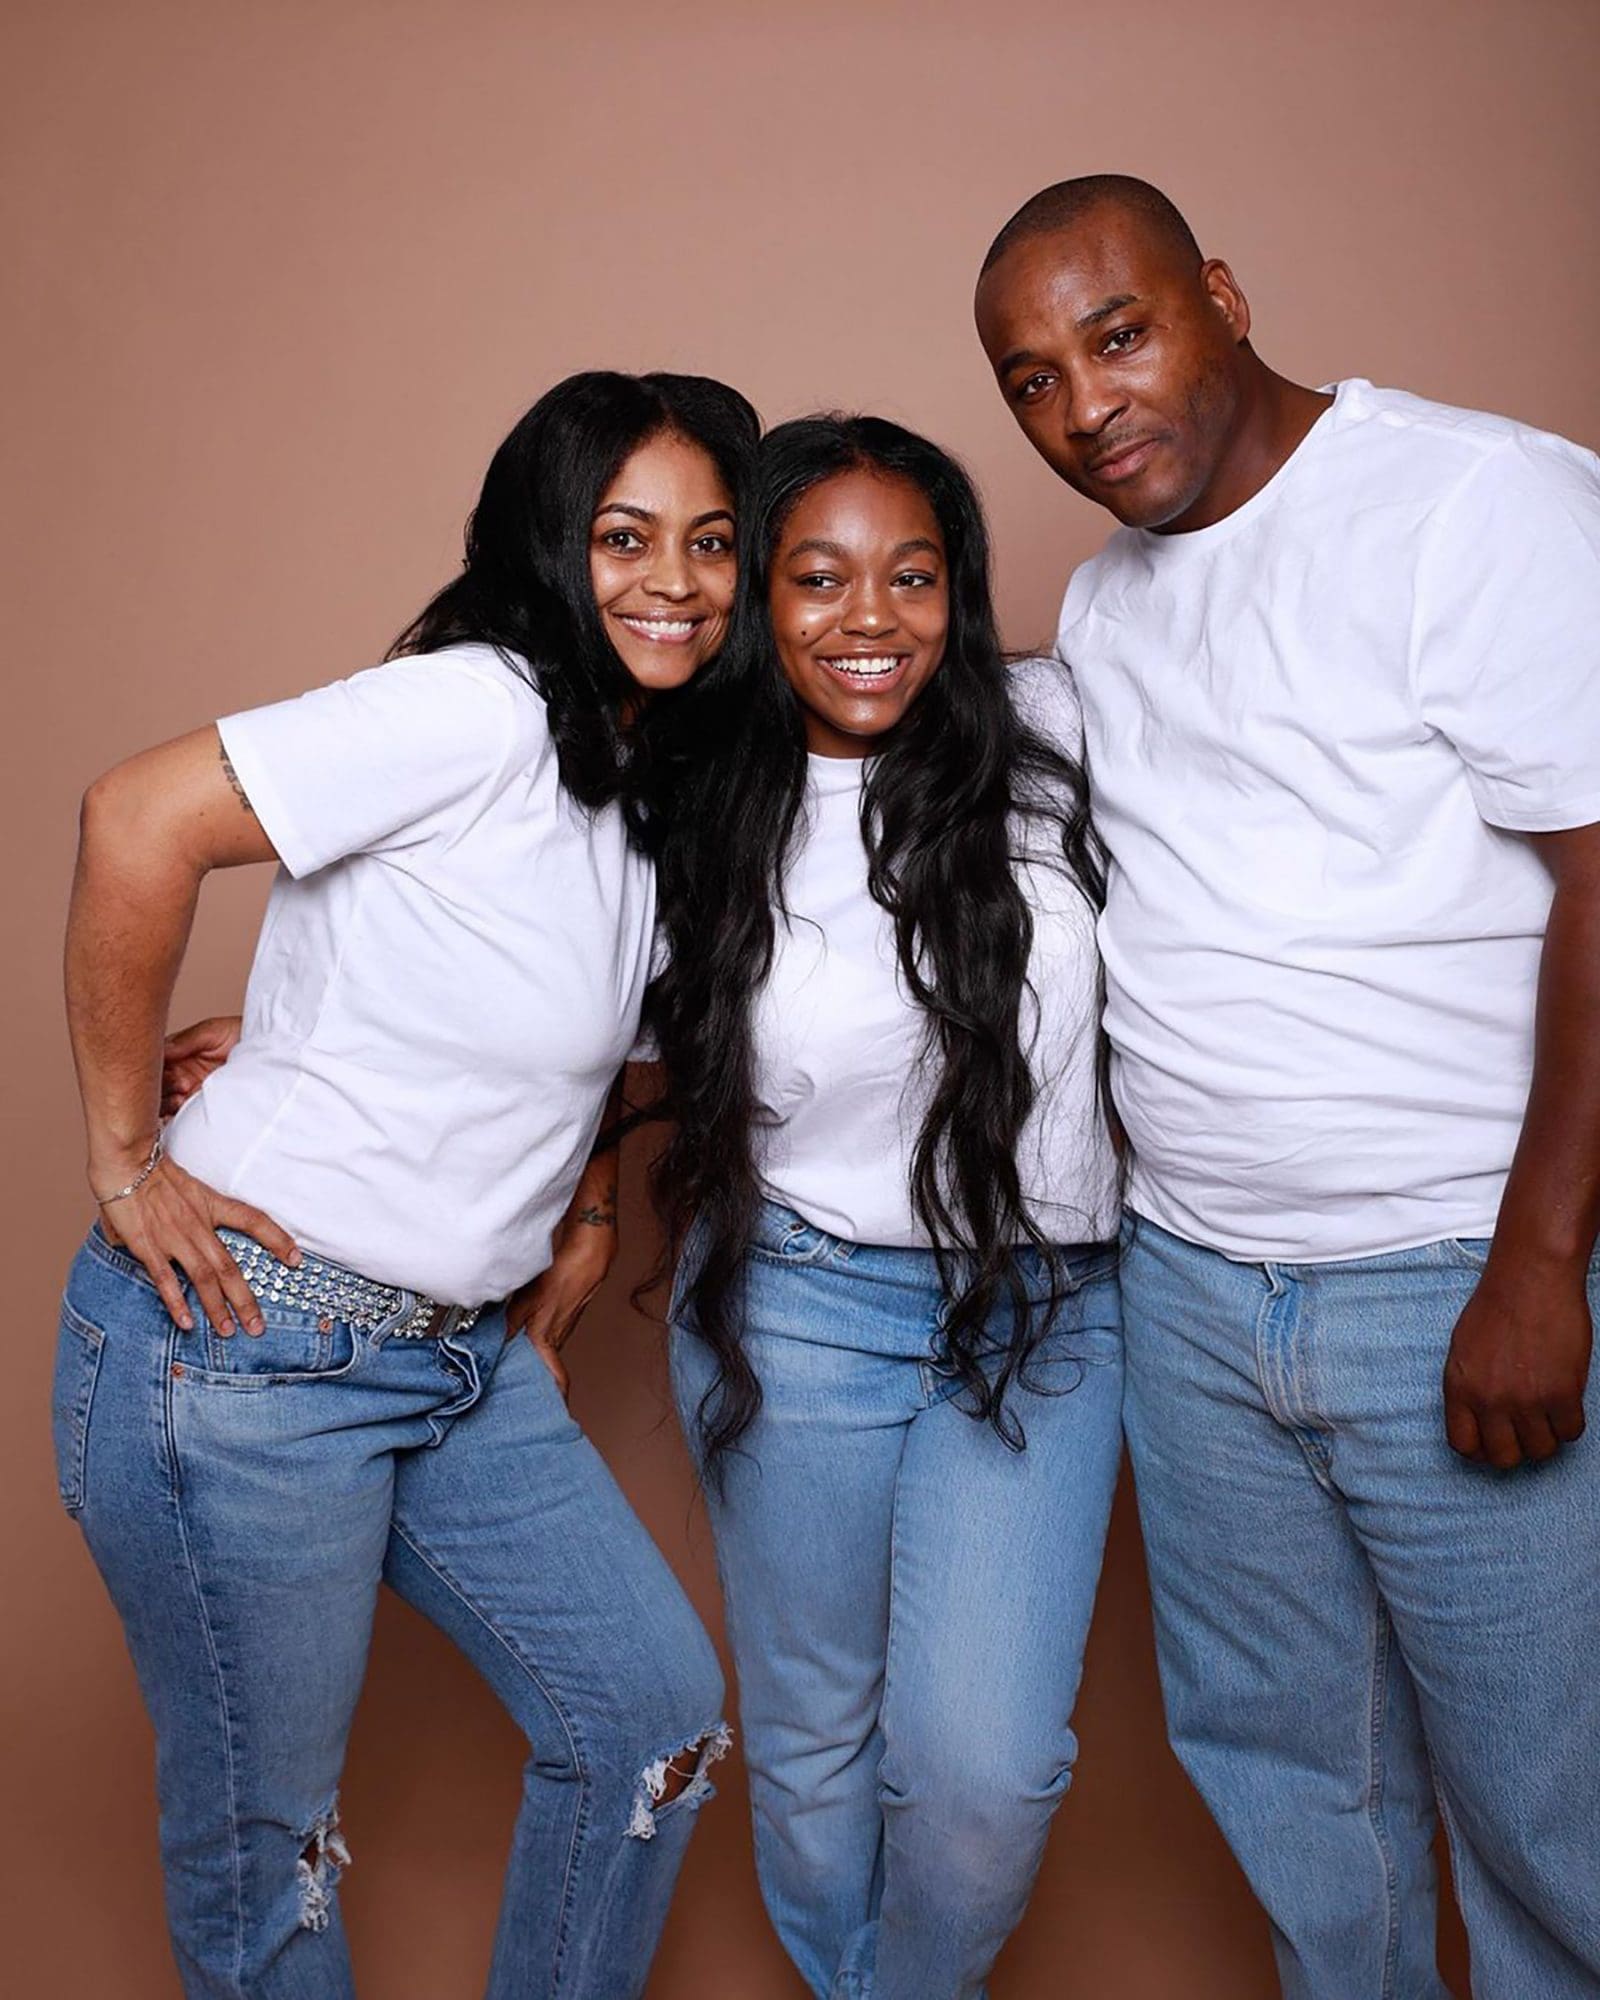 Azriel Clary with her family doing reunion wearing a white t-shirt and jeans after her controversy 